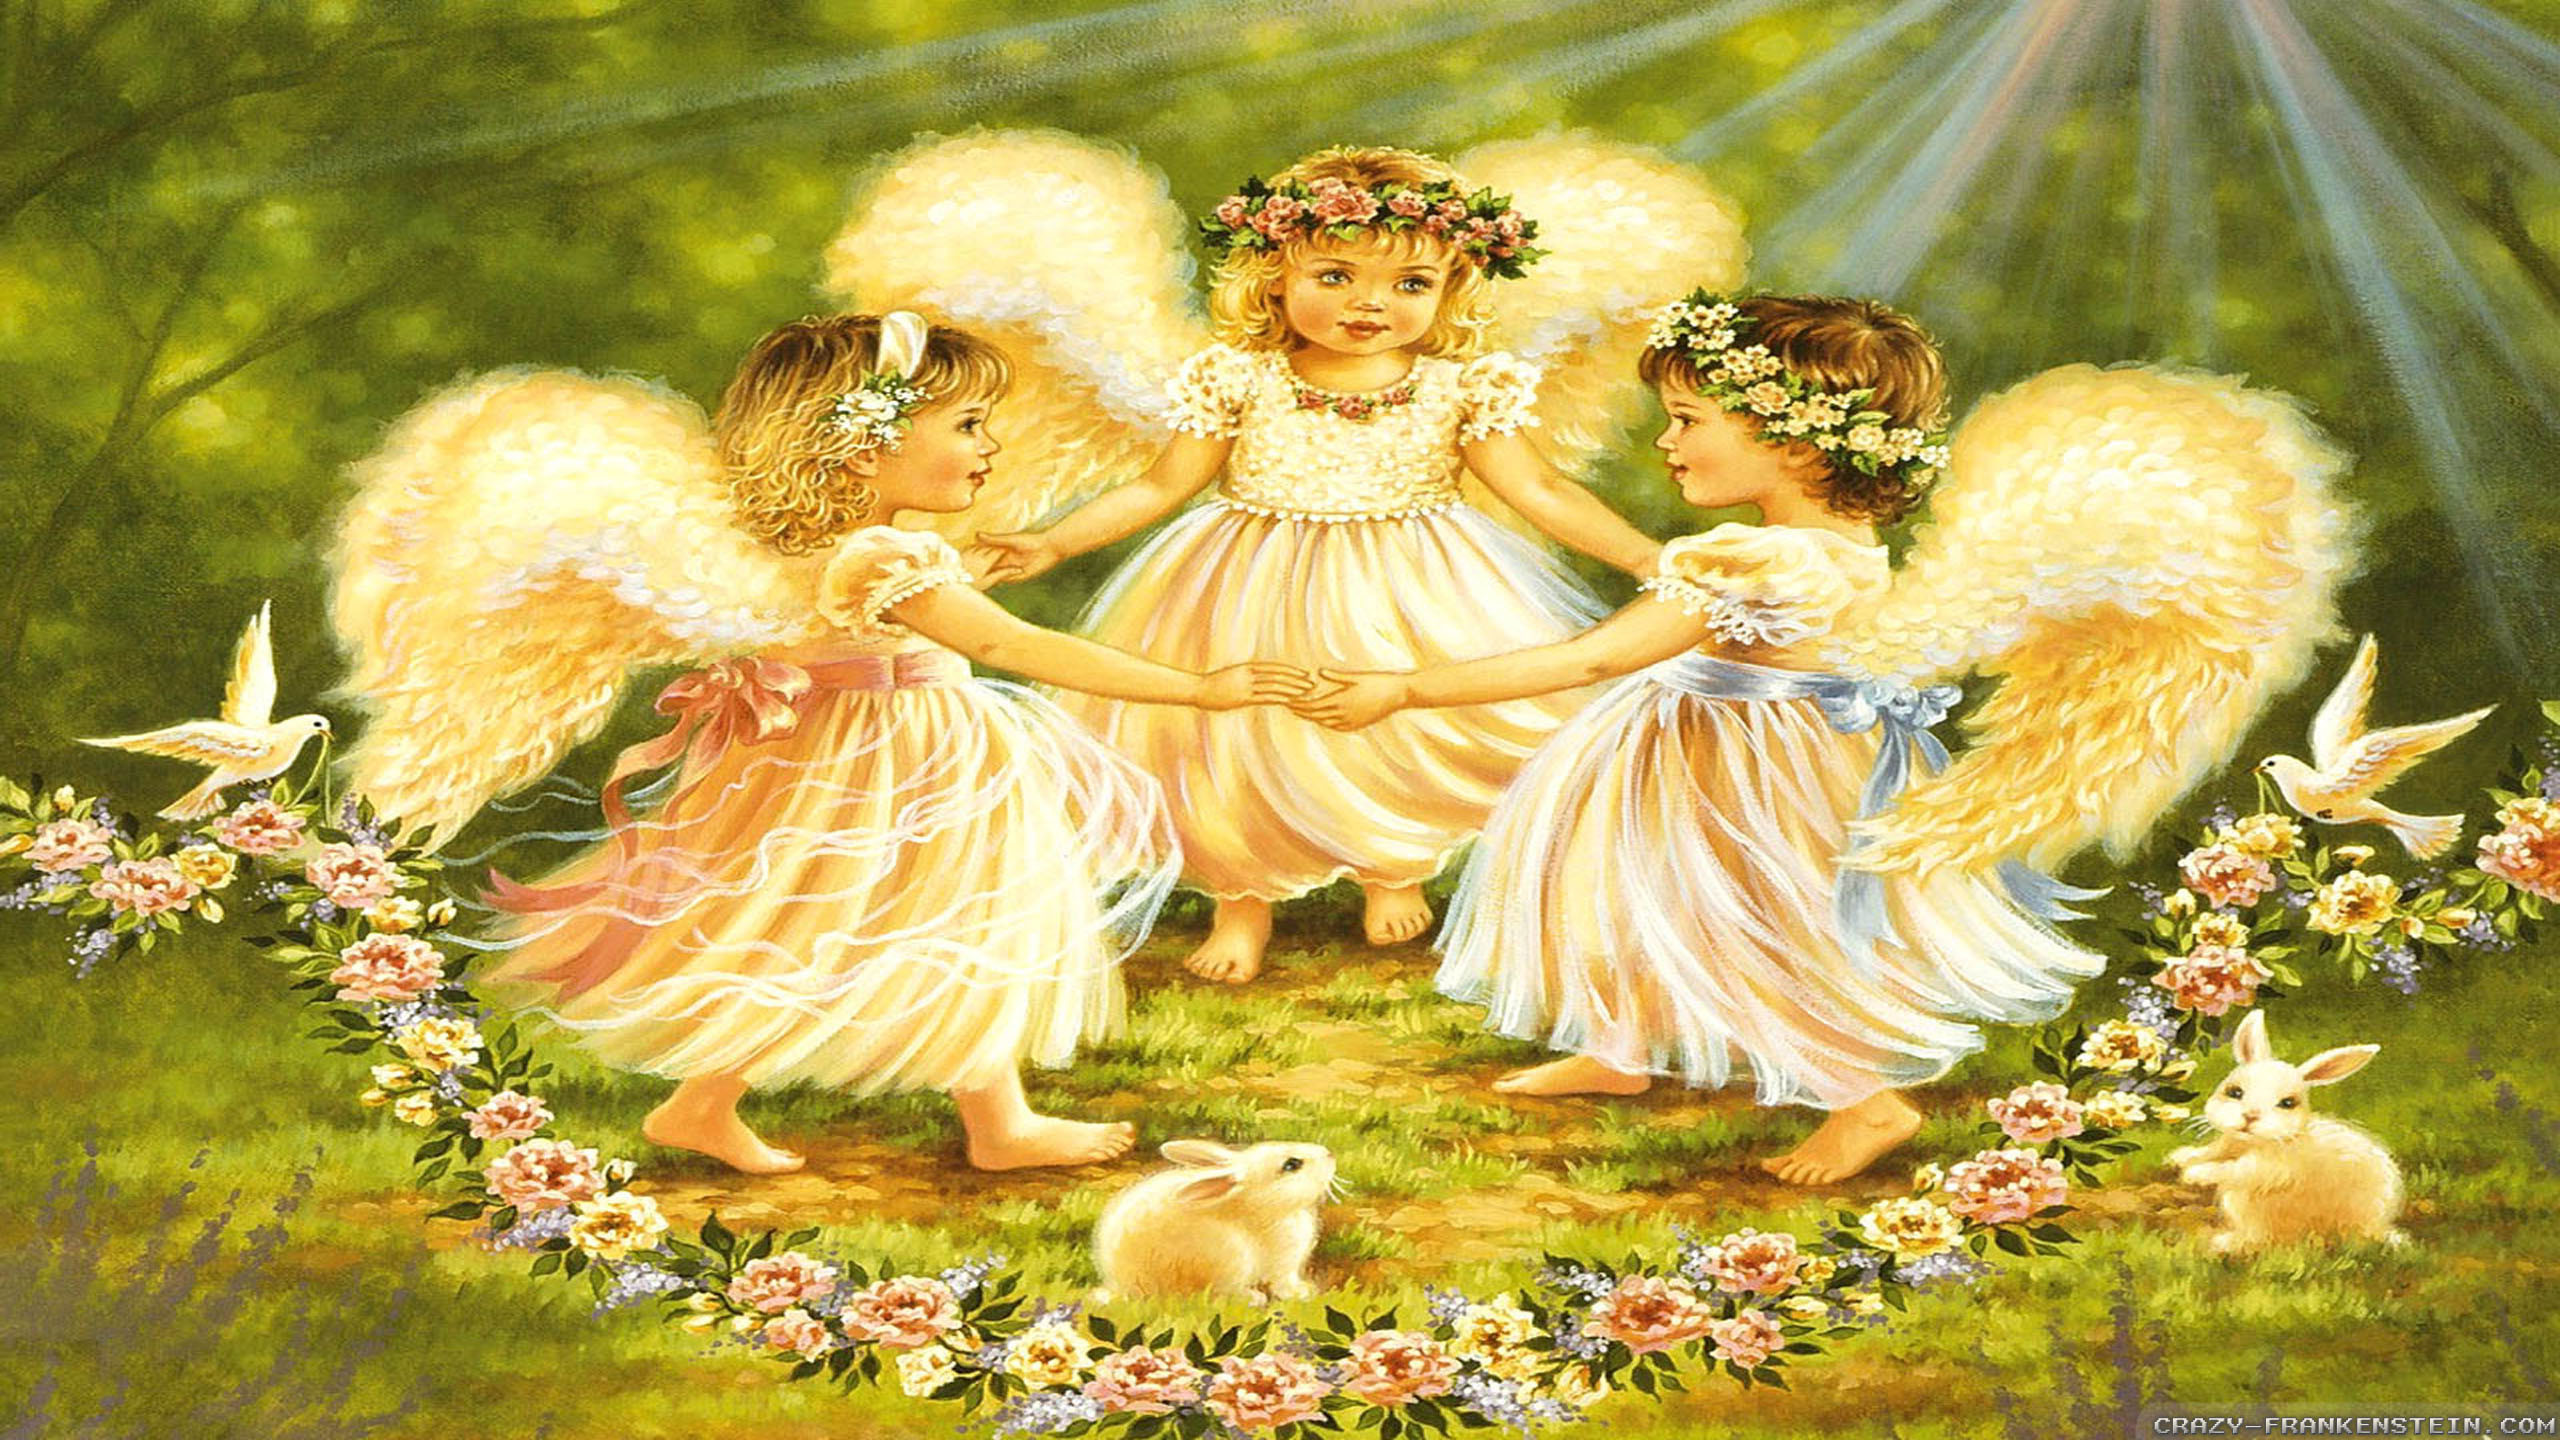 2560x1440 Angels wallpapers Gallery| Beautiful and Interesting Images,Vectors,Coloring,Cliparts  |Free Hd wallpapers